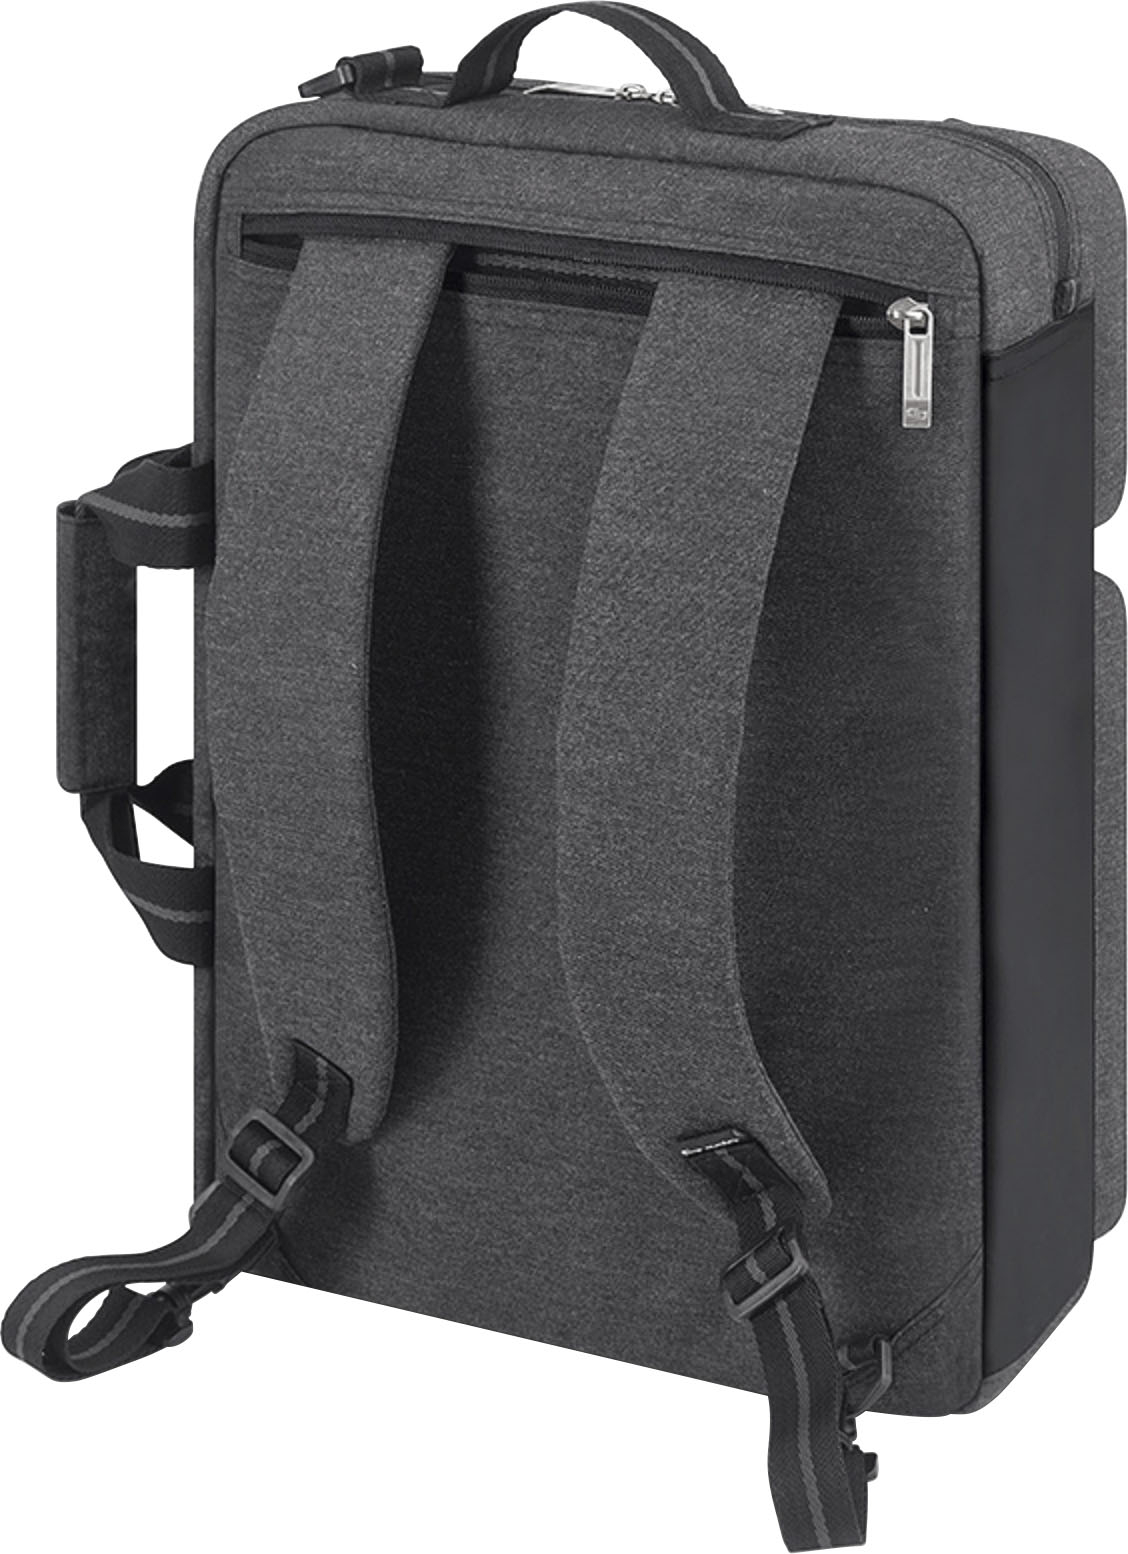 Back View: Solo New York - Urban Convertible Laptop Briefcase Backpack for 15.6" Laptop - Gray